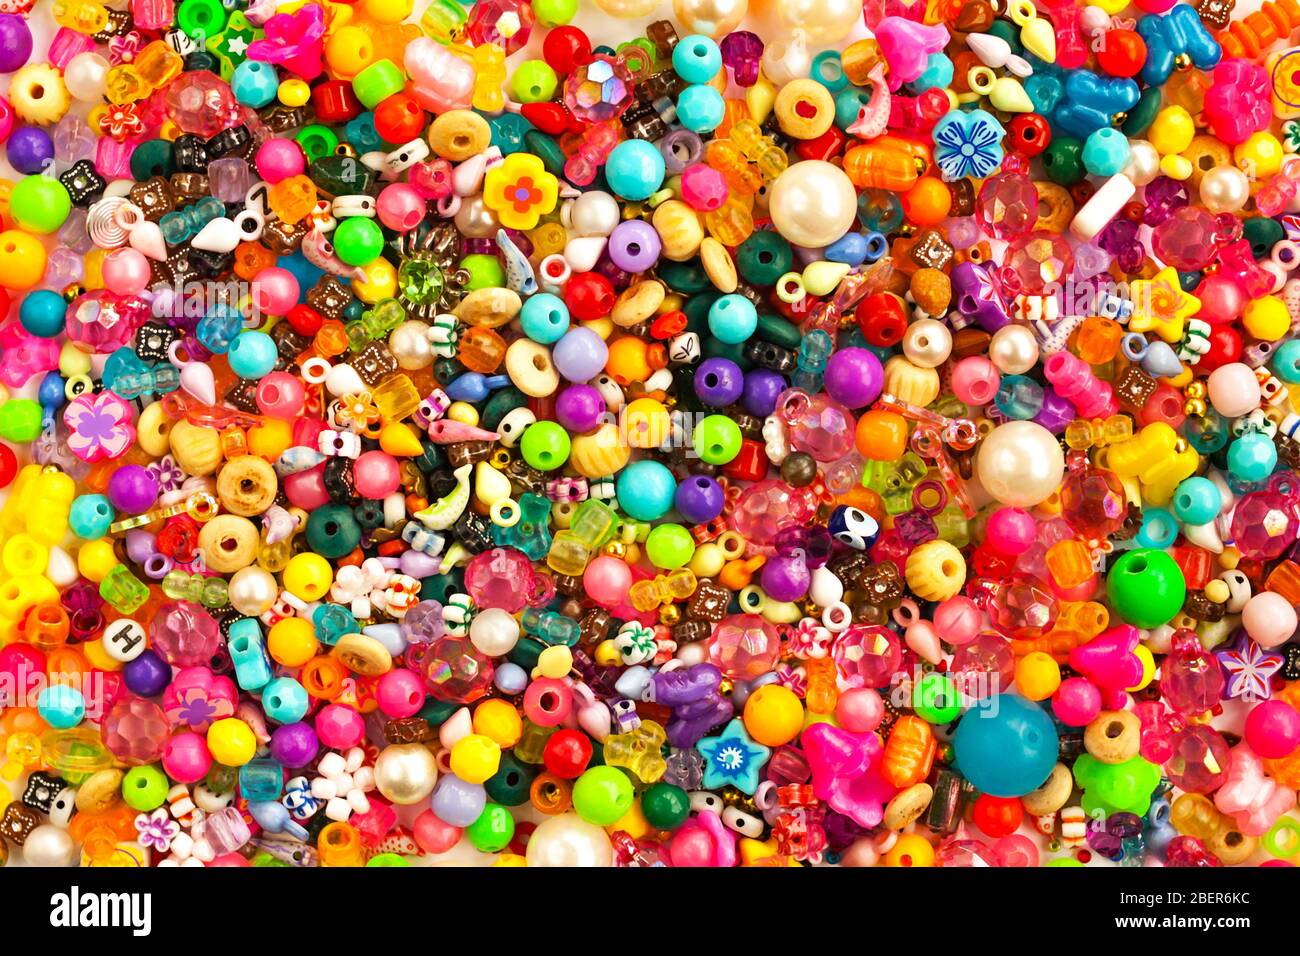 Multicolored beads background. Mix of shiny different size, shape jewelry glass and plastic bead. Stock Photo